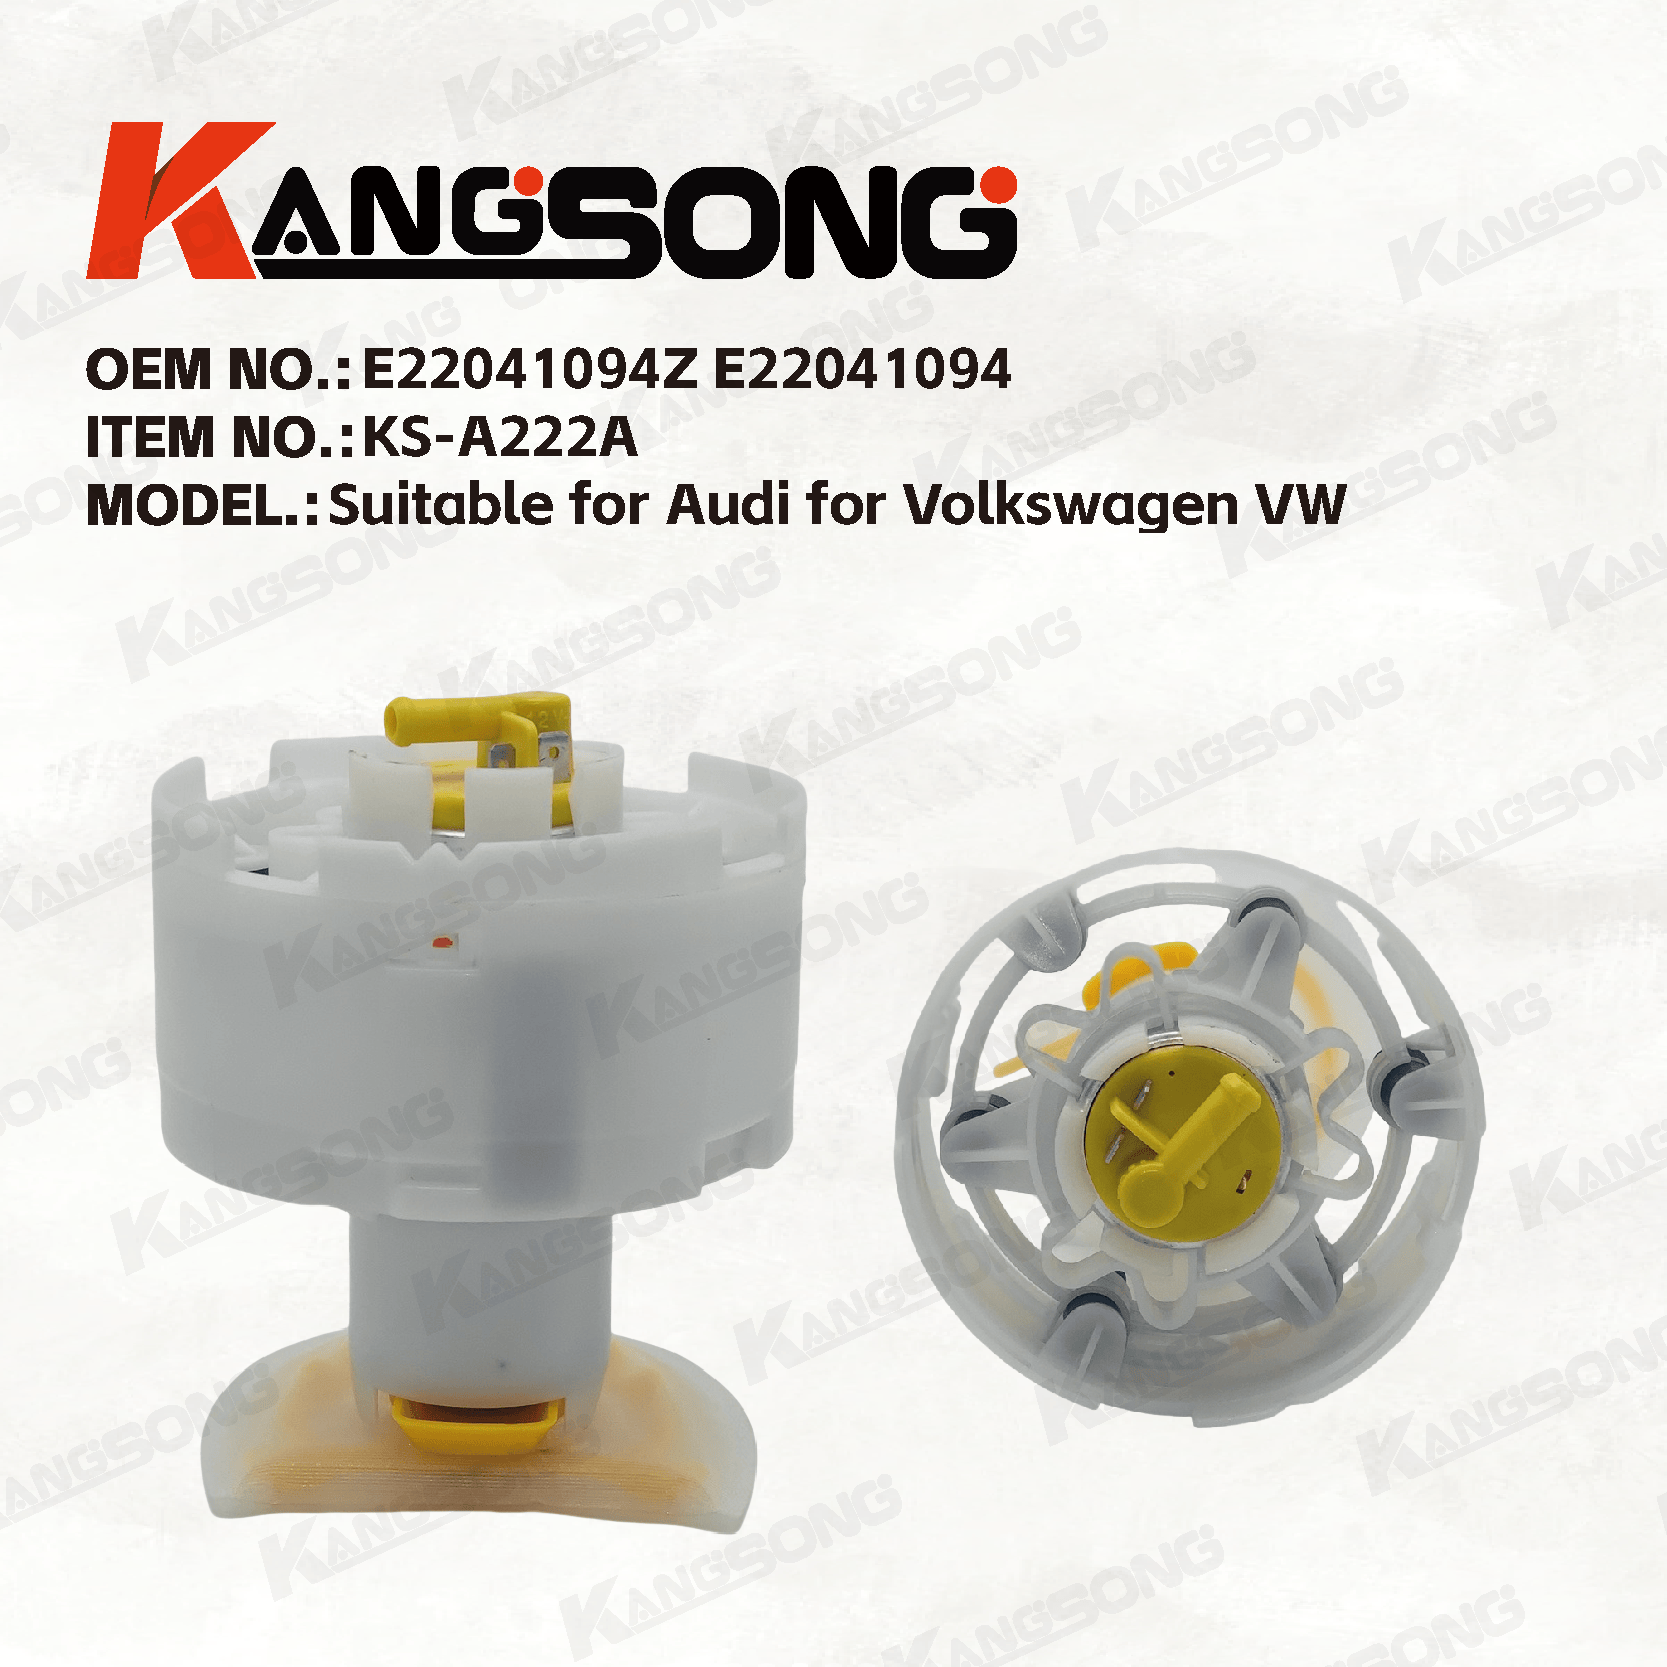 Applicable to Audi for Volkswagen VW/E22041094Z E22041094/Fuel Pump Assembly/KS-A222A